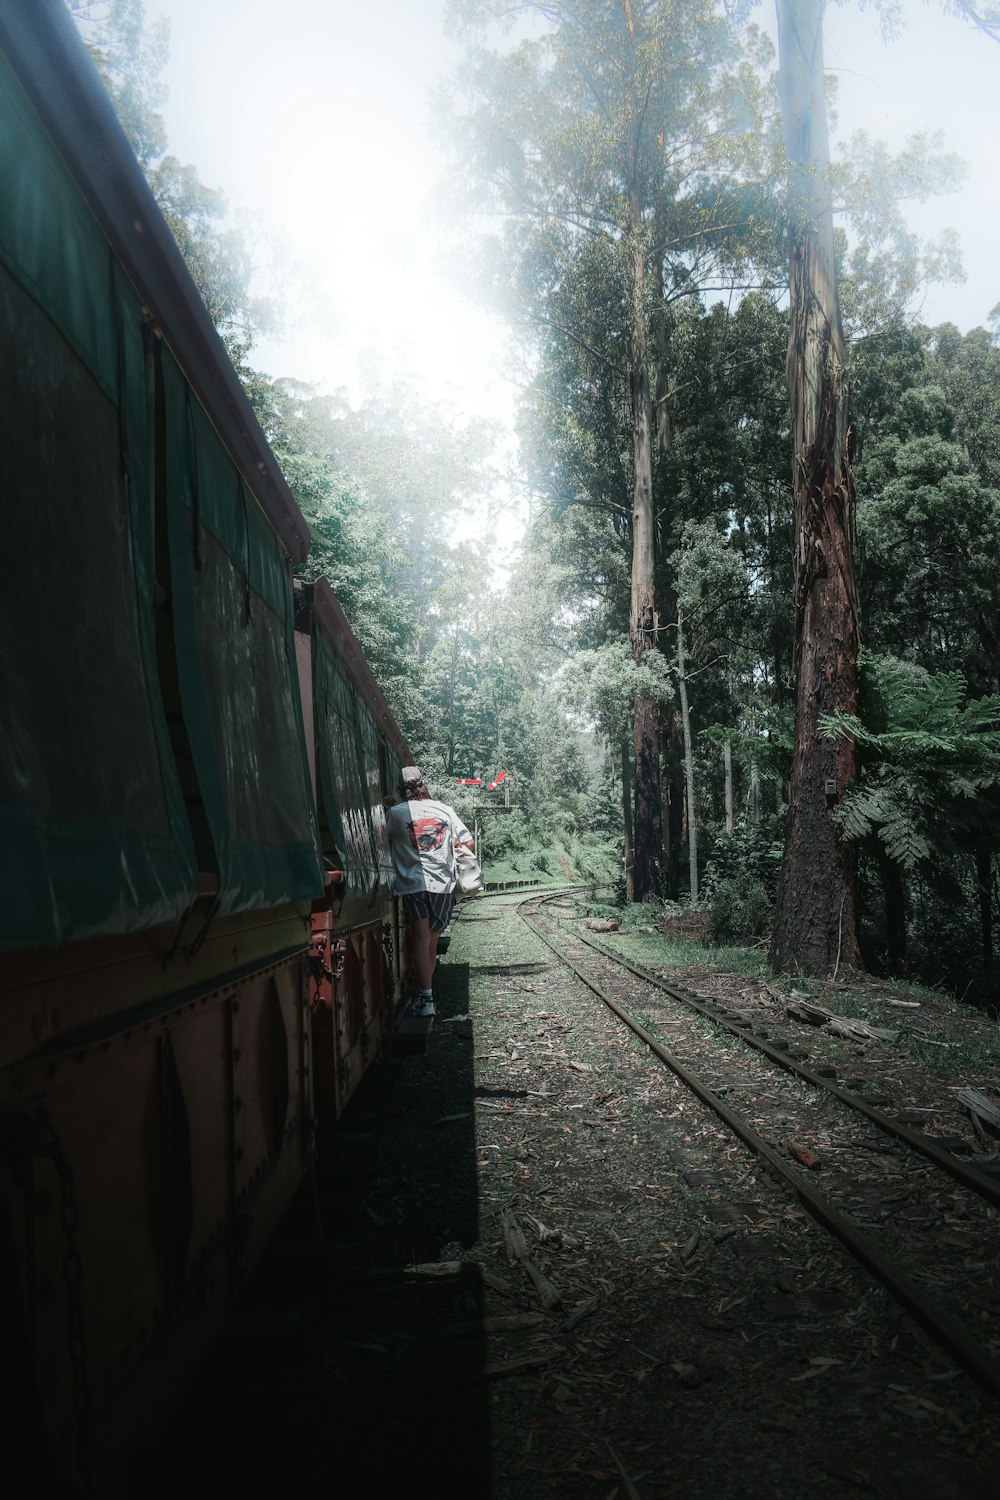 train in the middle of the forest